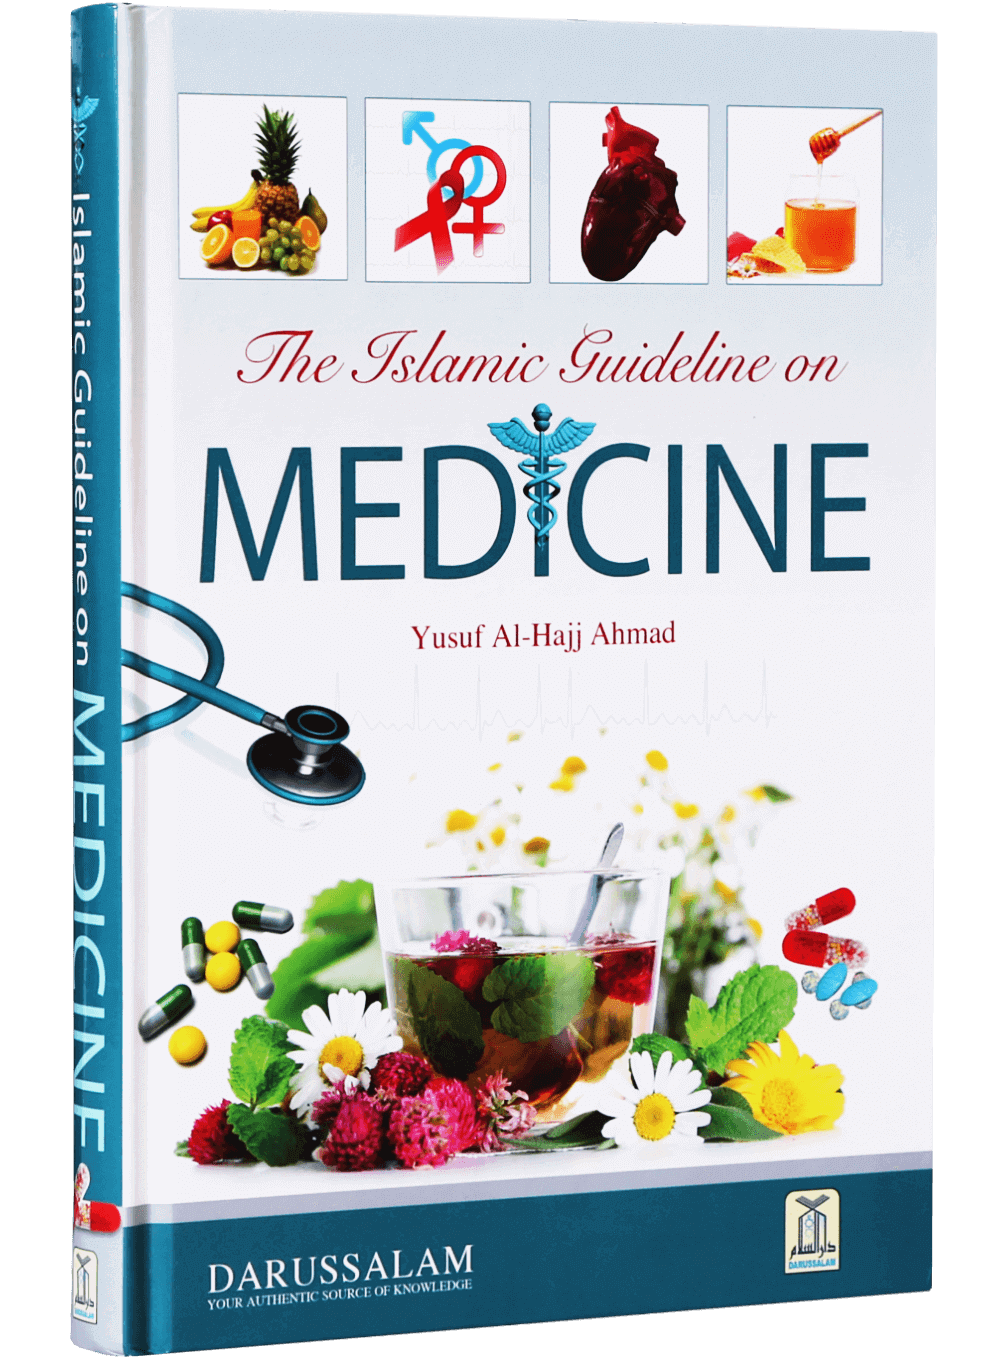 darussalam-2017-08-18-09-42-27the-islamic-guideline-on-medicine-(2)